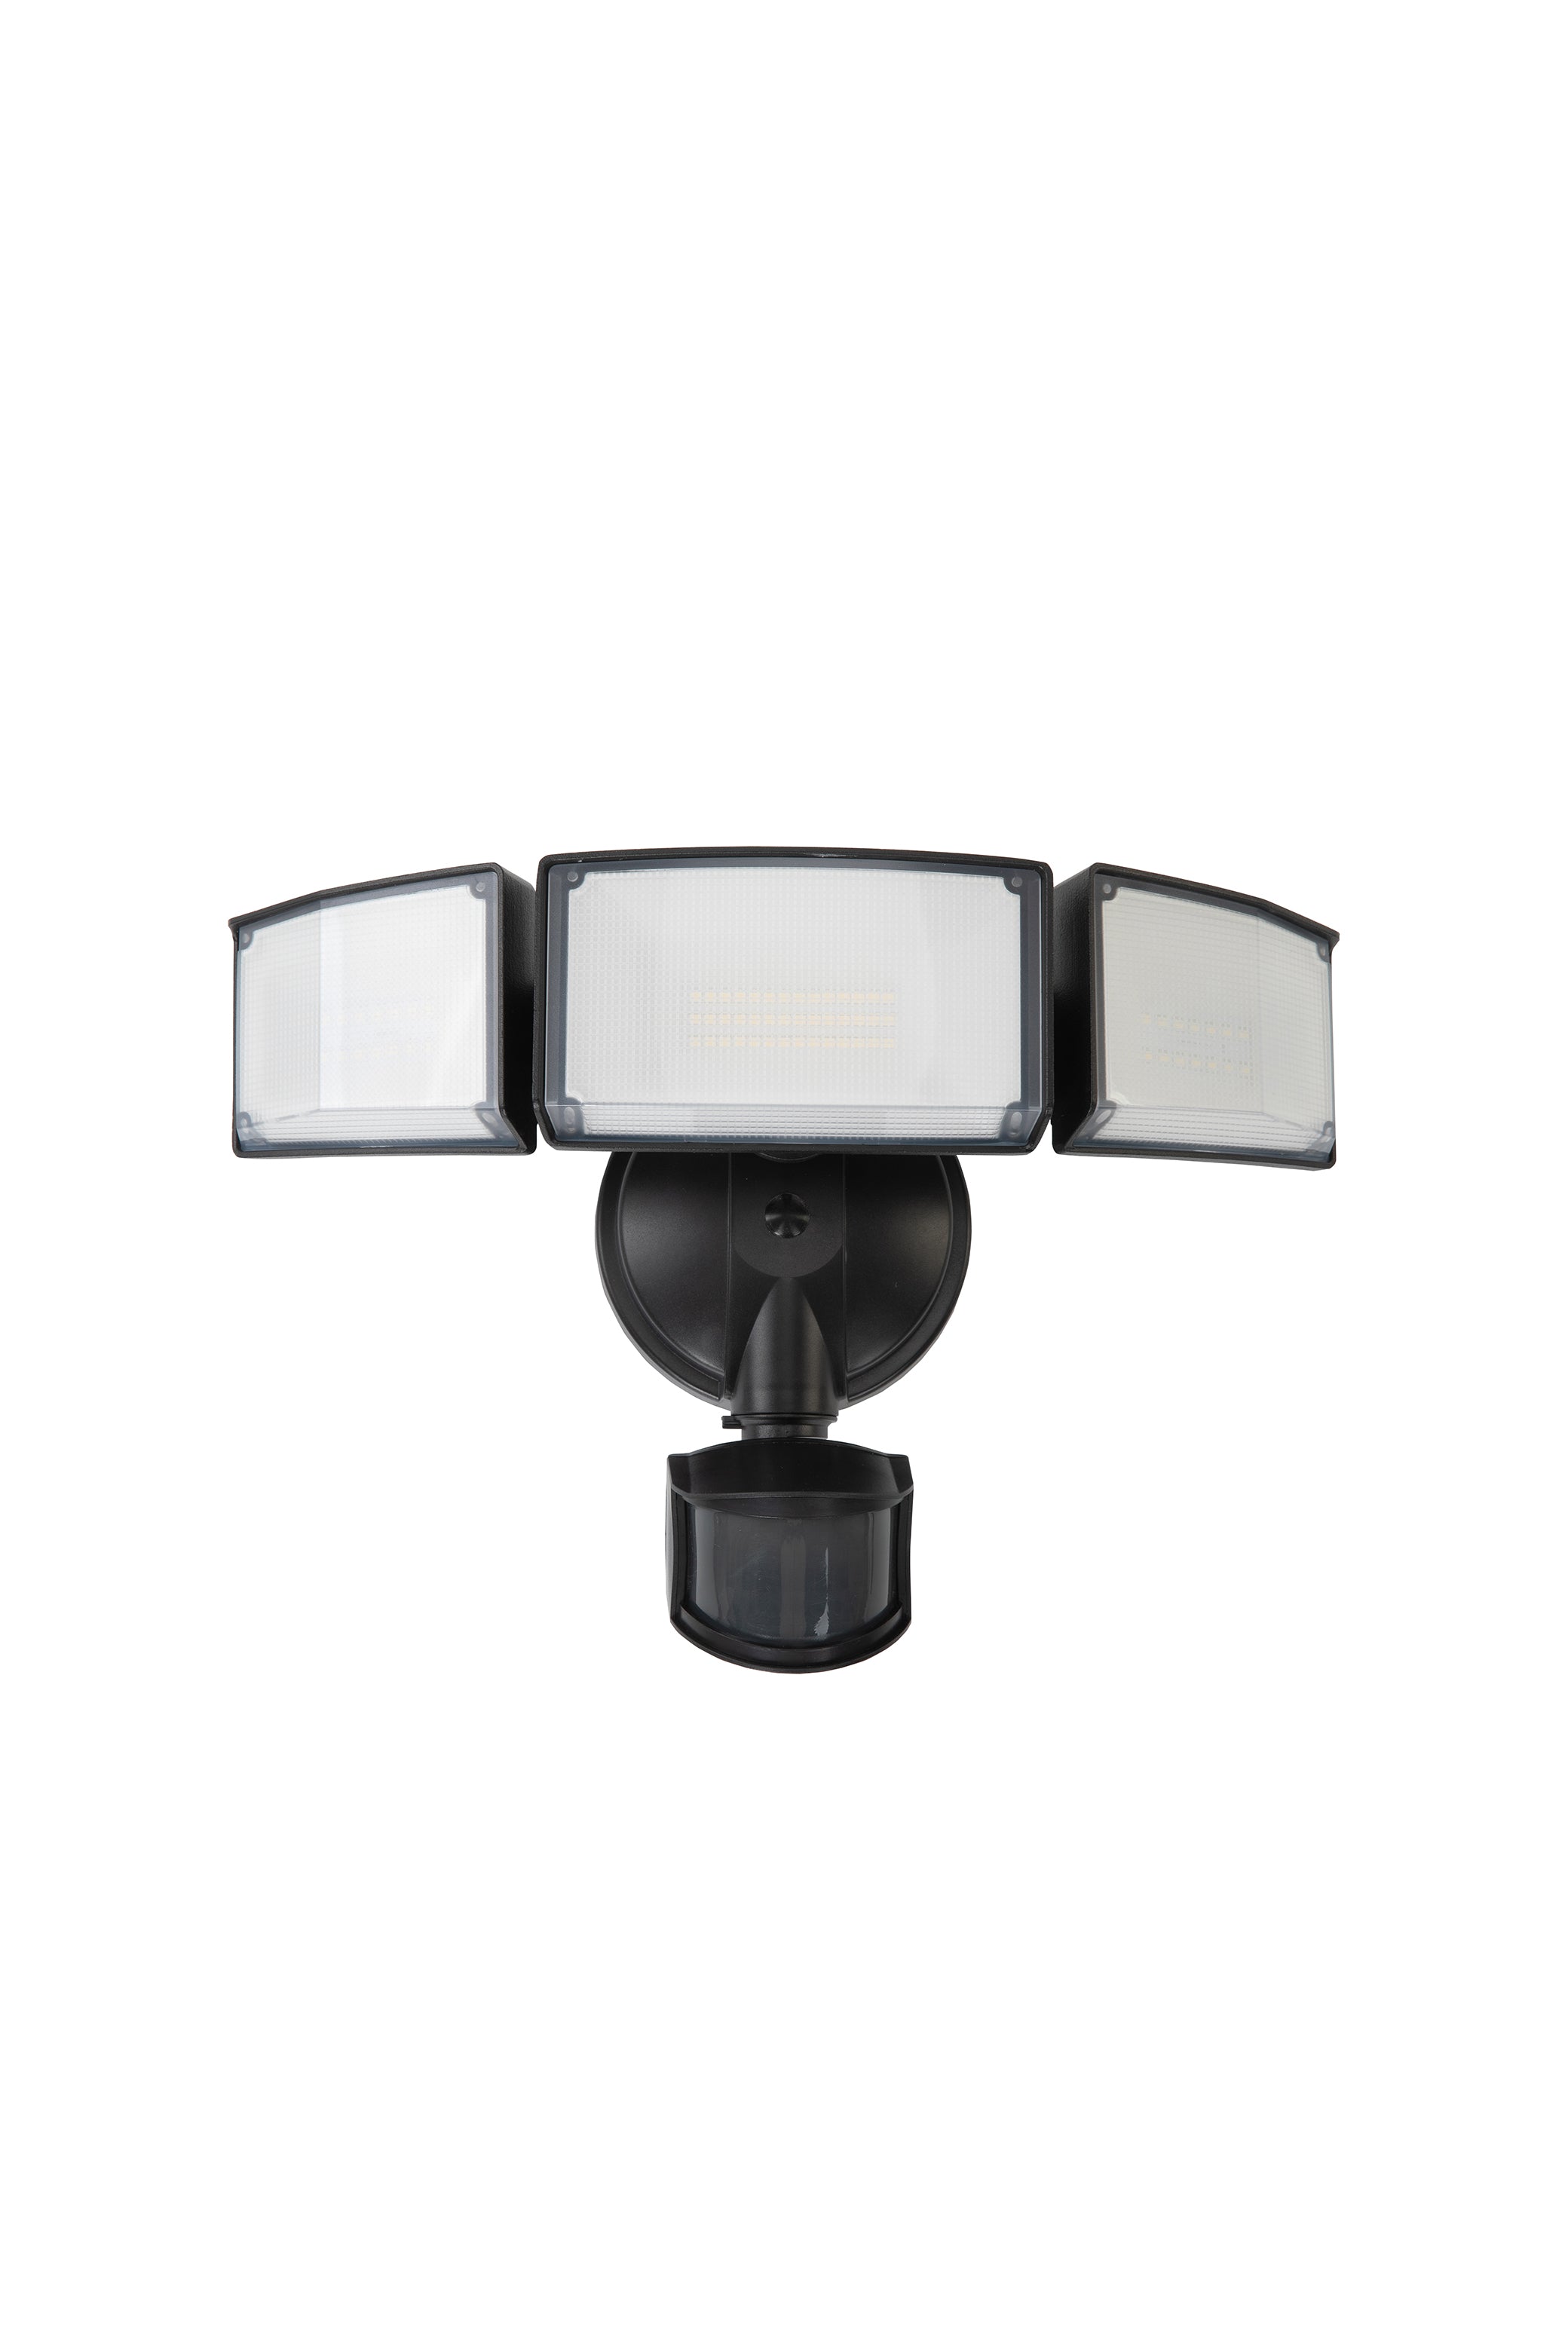 LUTEC-LED Security Lights with 72W, 5000K, 6300LM, Sensor, Motion with